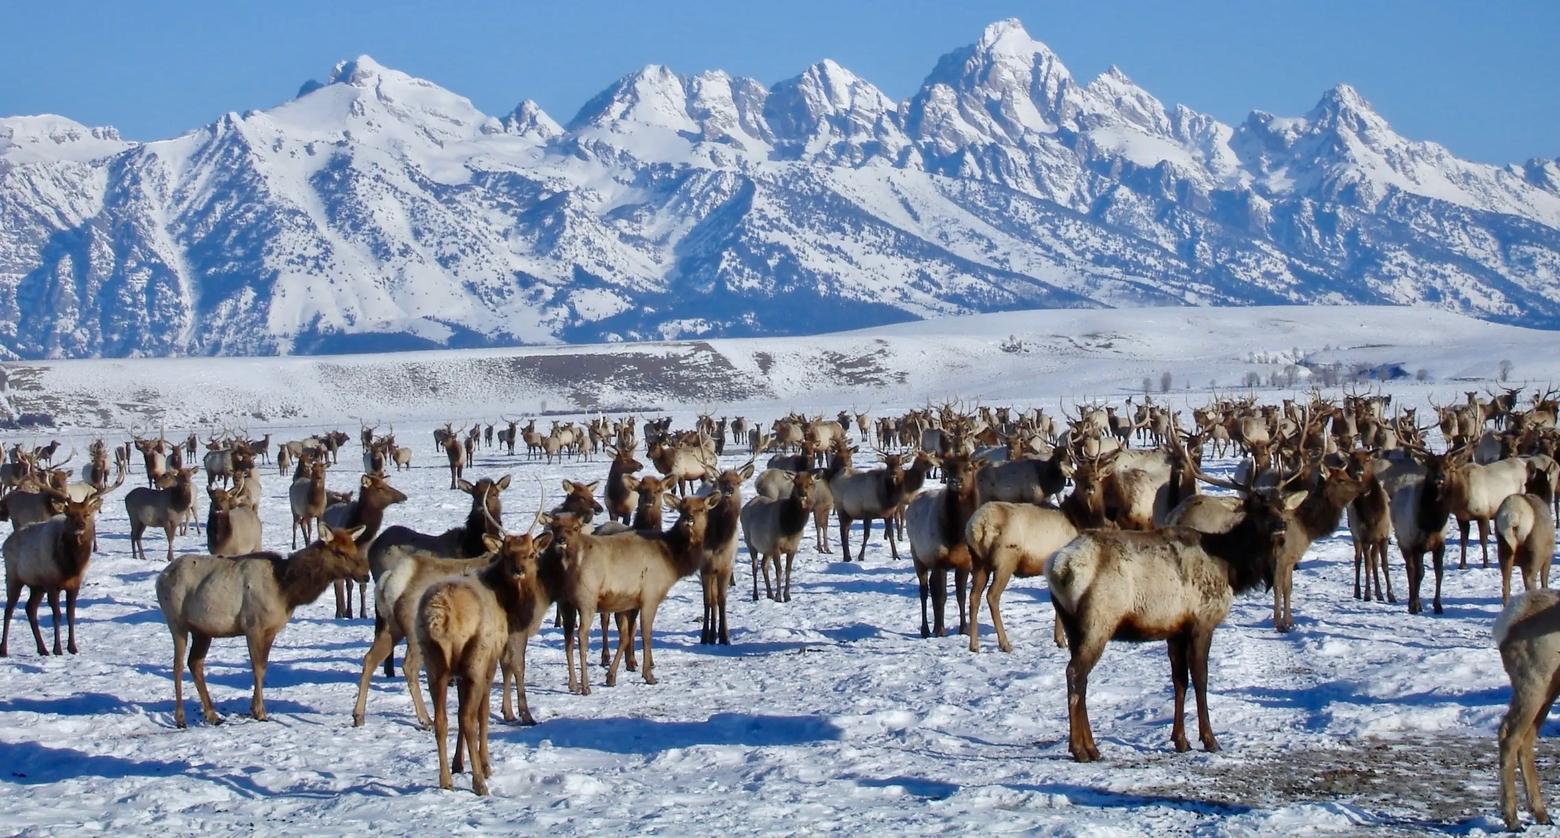 Every year thousands of elk gather in tight quarters over artificial feed at the National Elk Refuge in Jackson Hole. The good news is that Chronic Wasting Disease has not yet been detected in animals on the refuge itself but CWD has turned up in elk and deer right along its edge. Disease experts say it's only a matter of time before CWD takes hold and then it's anybody's guess what the consequences will be.  Photo courtesy National Elk Refuge.